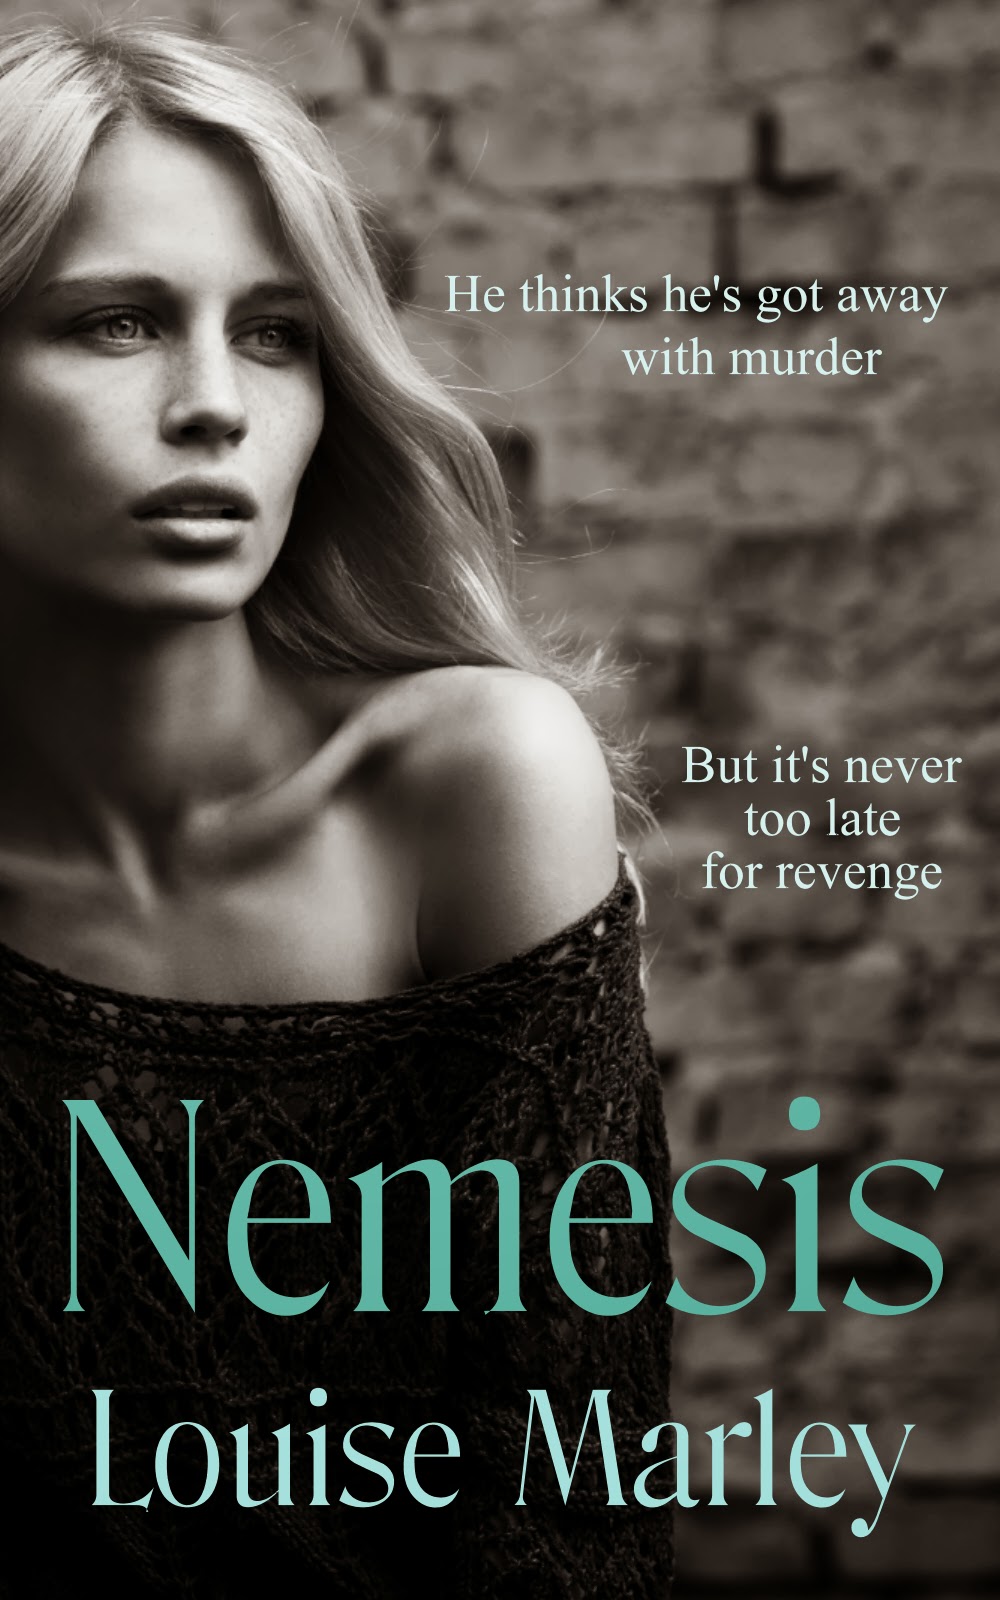 Nemesis by Louise Marley